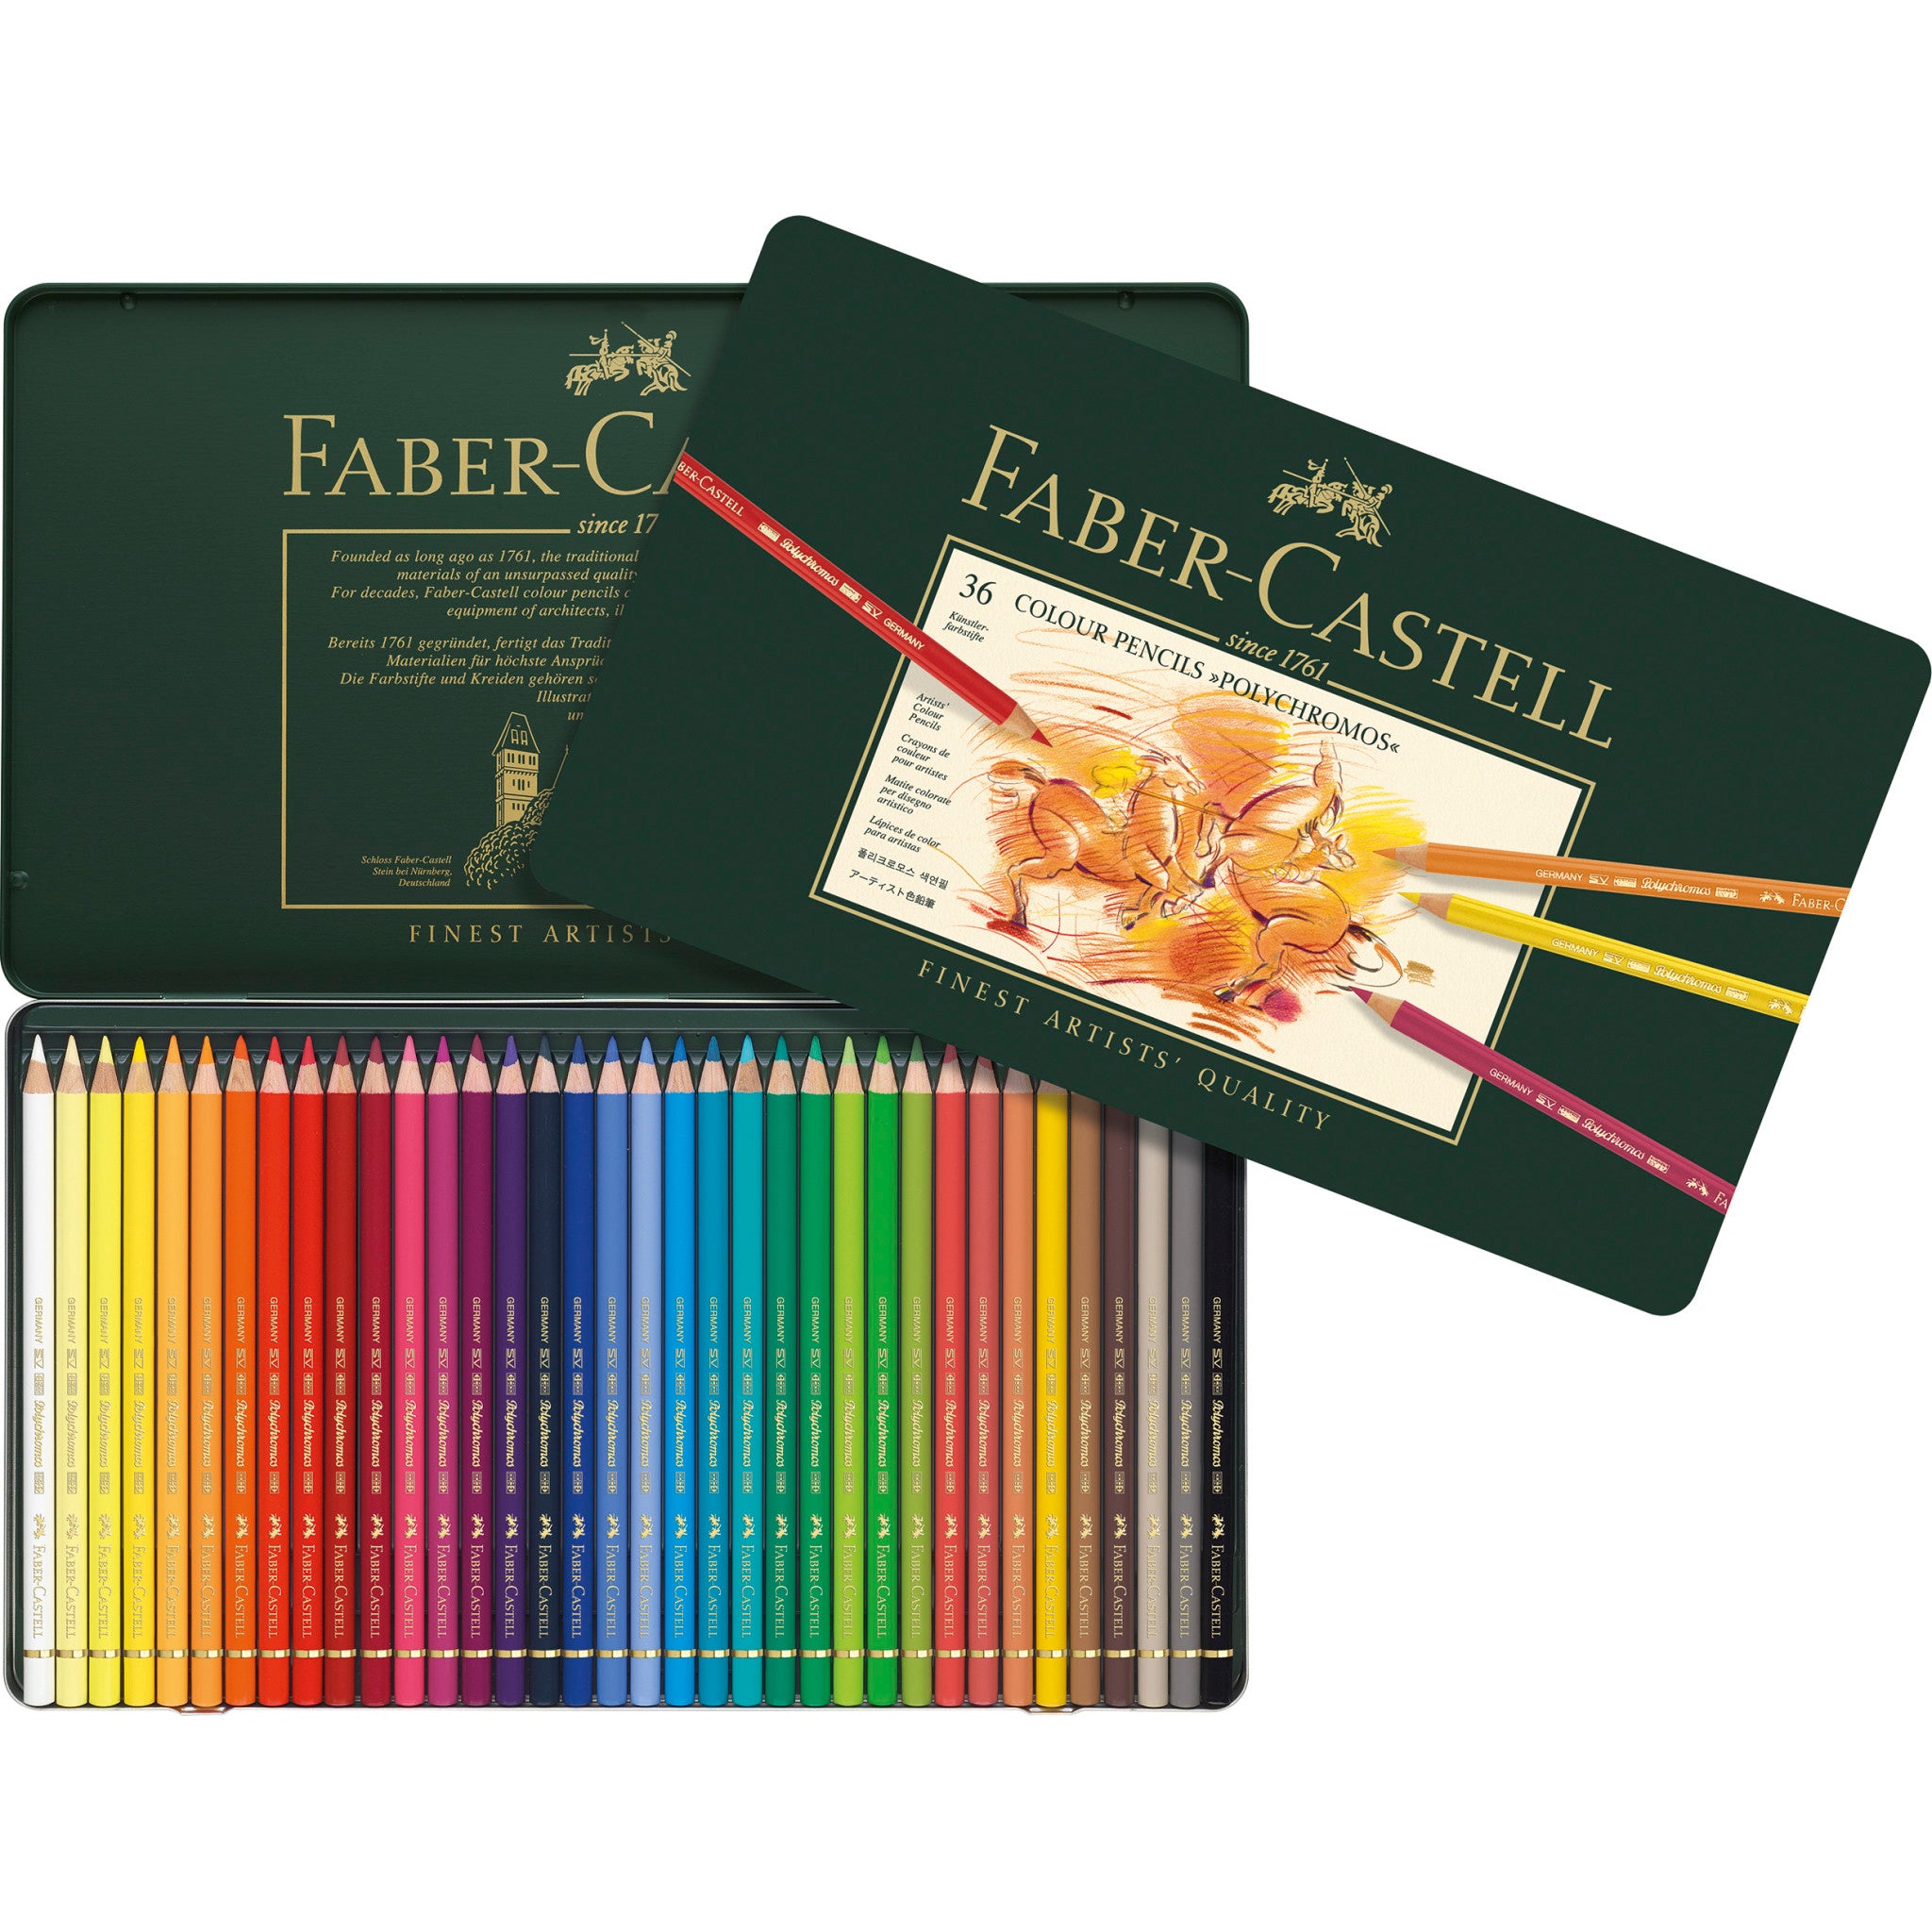 Faber-Castell Colour Grip - Tin of 36